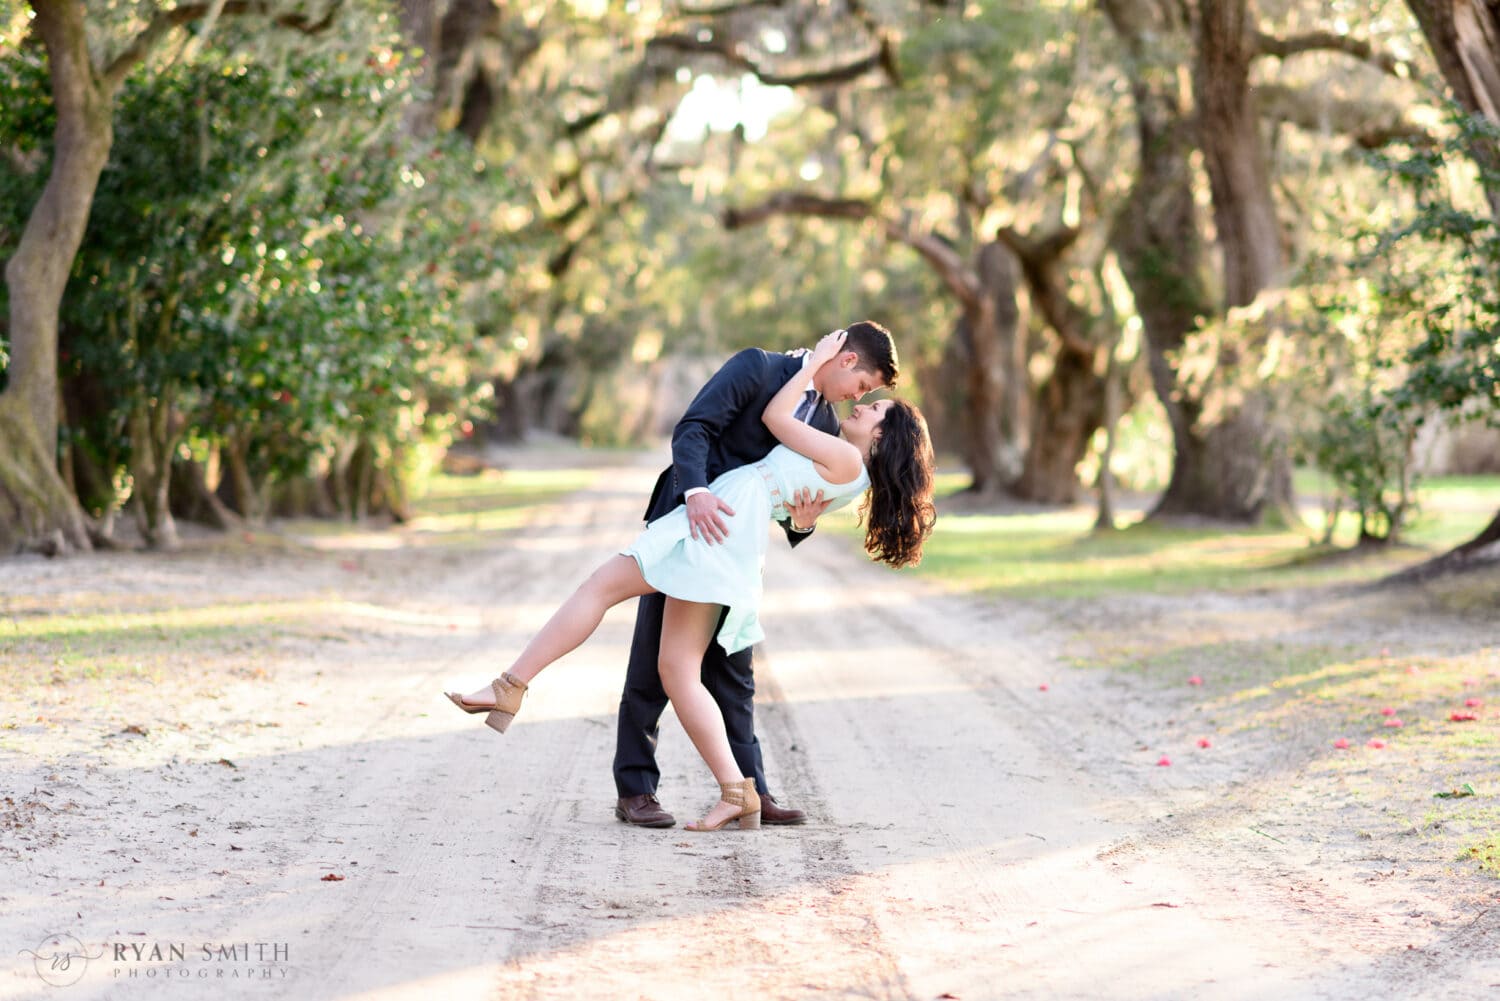 Dip back for a kiss under the oak trees - Mansfield Plantation, Georgetown